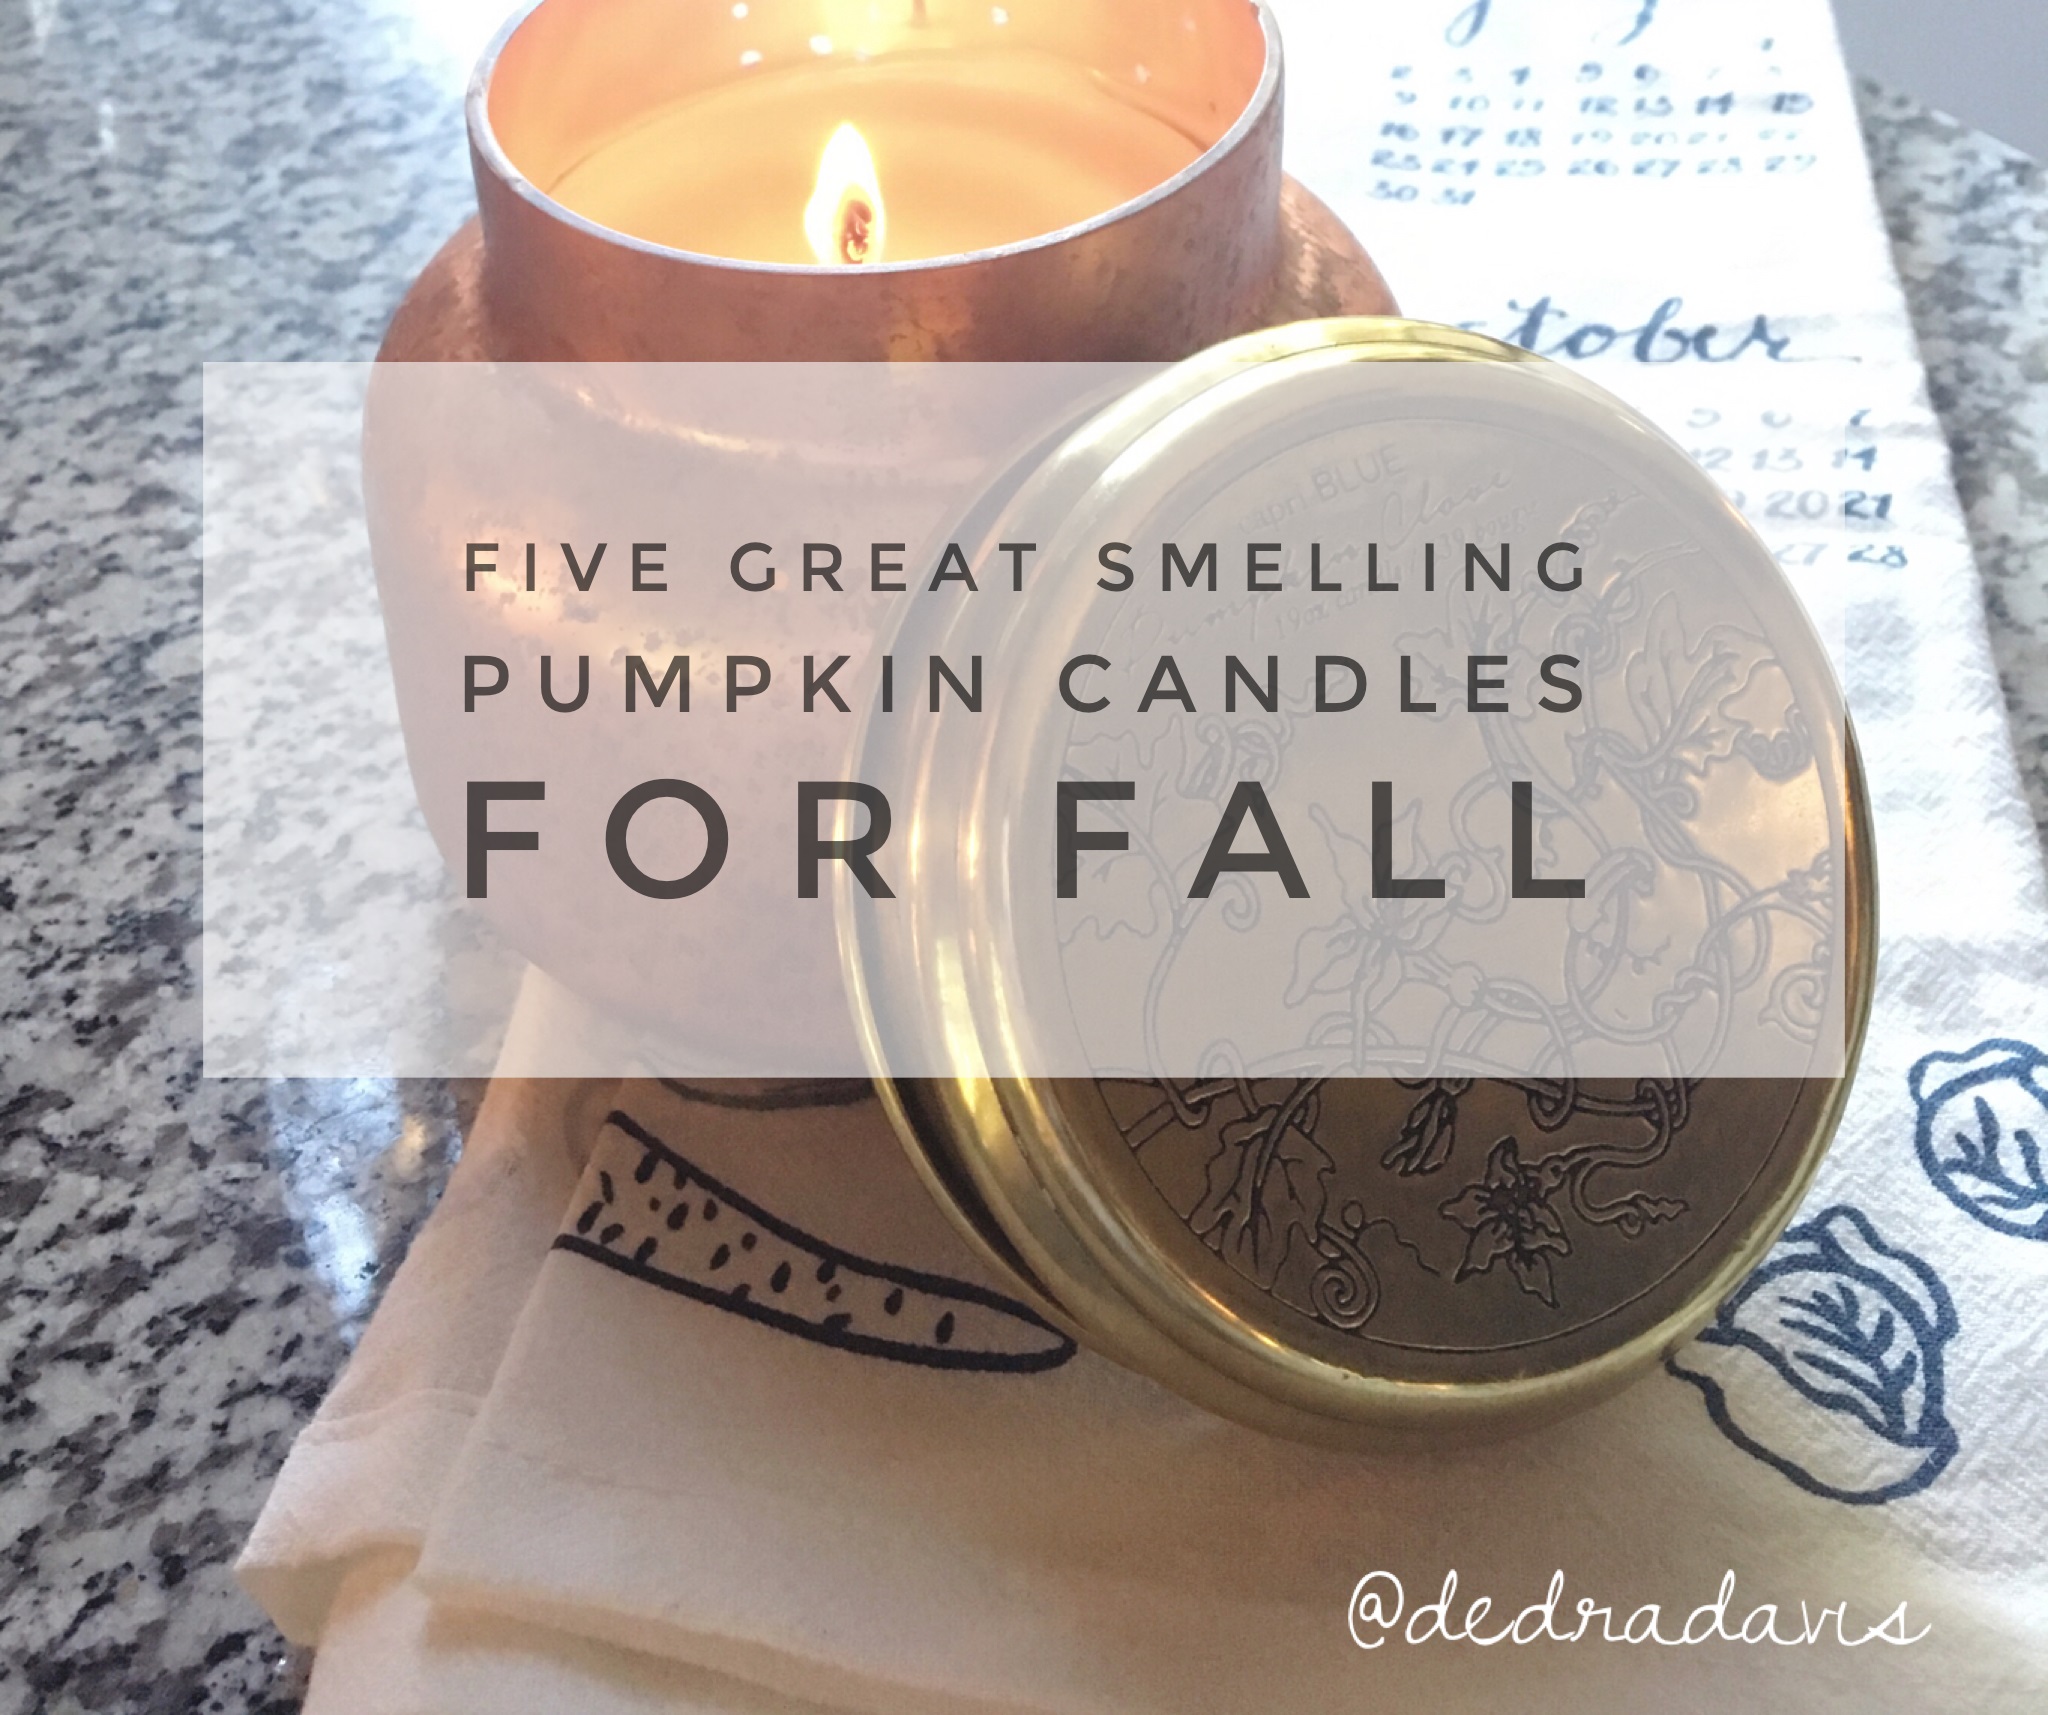 Five Great Smelling Pumpkin Candles For Fall